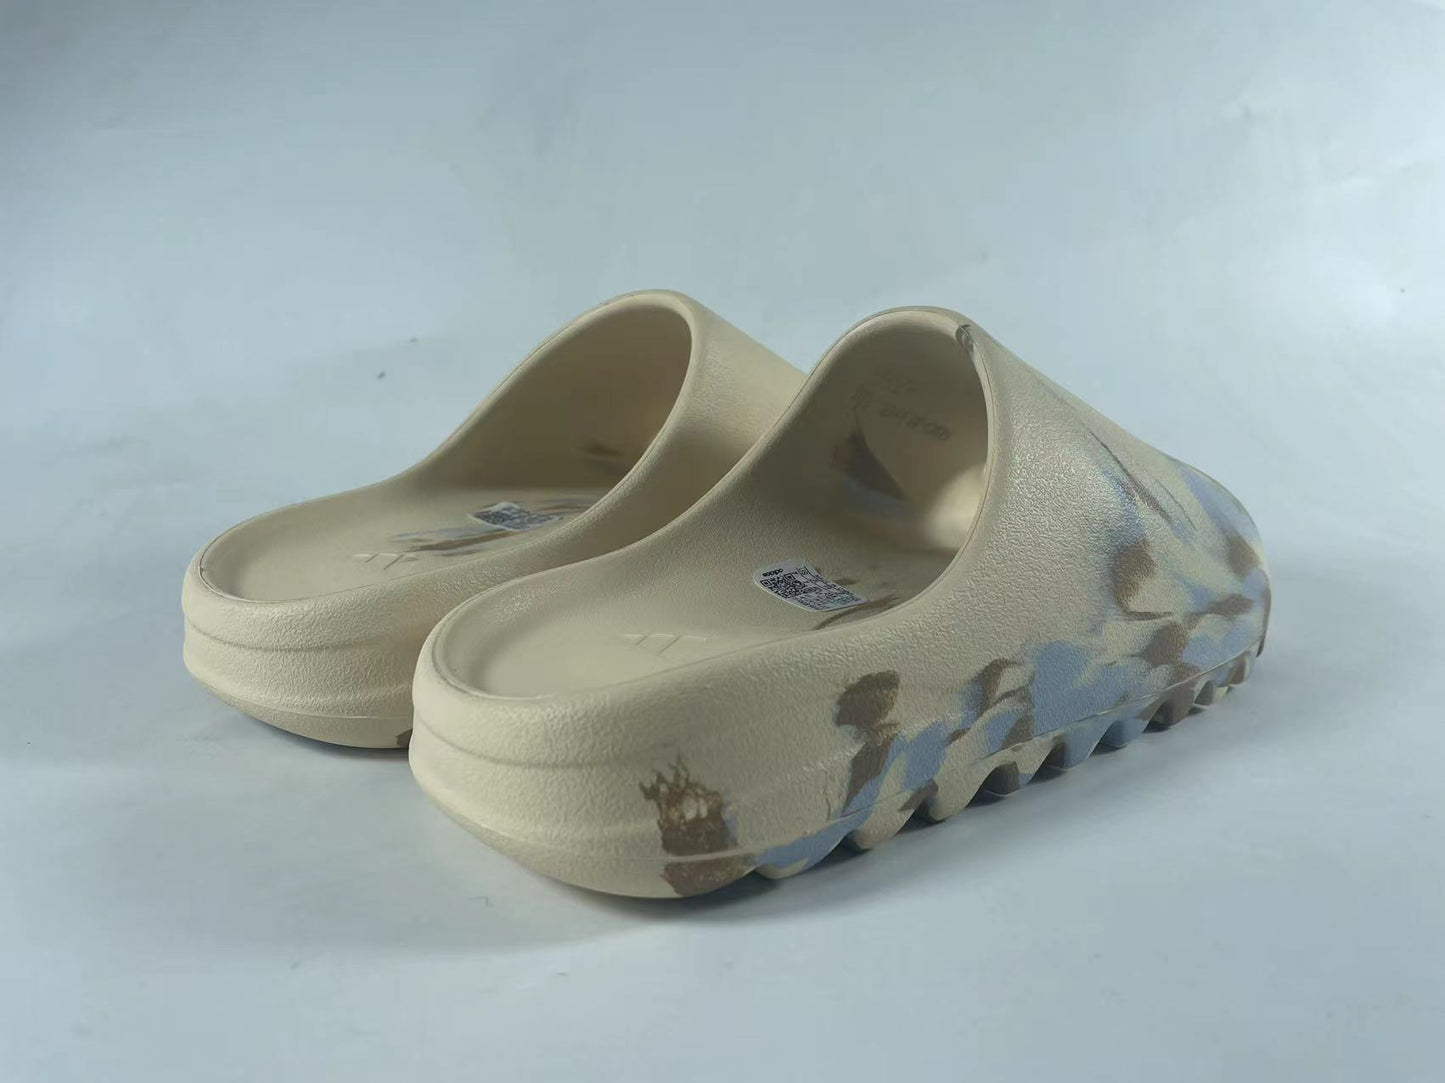 Yeezy Slide "Enflame Oil Painting White Yellow" (Releasing Soon & Very Limited)